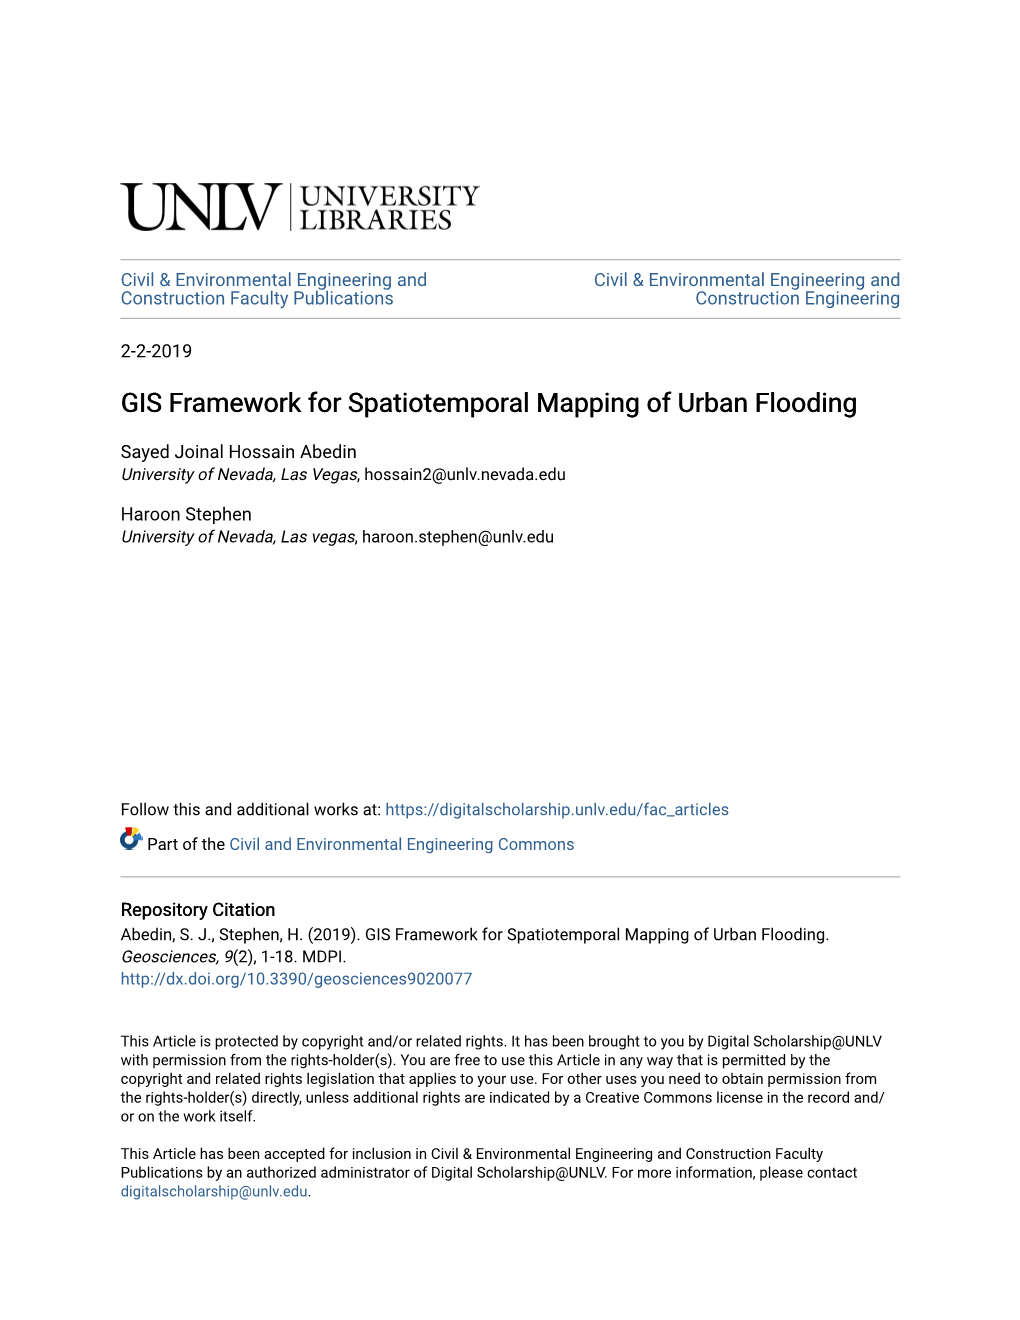 GIS Framework for Spatiotemporal Mapping of Urban Flooding